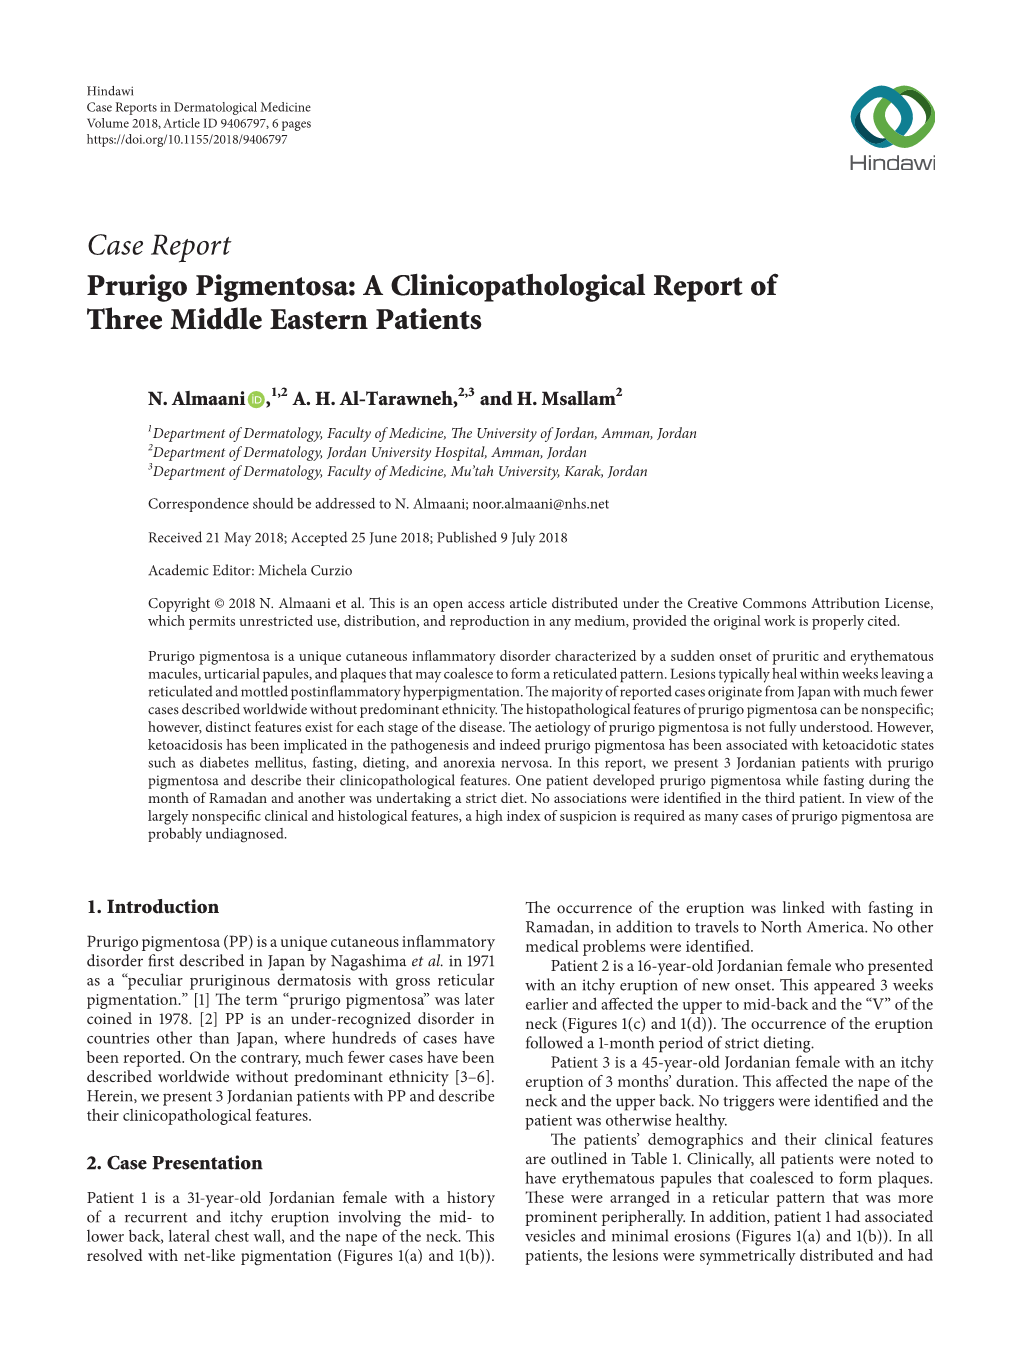 Case Report Prurigo Pigmentosa: a Clinicopathological Report of Three Middle Eastern Patients